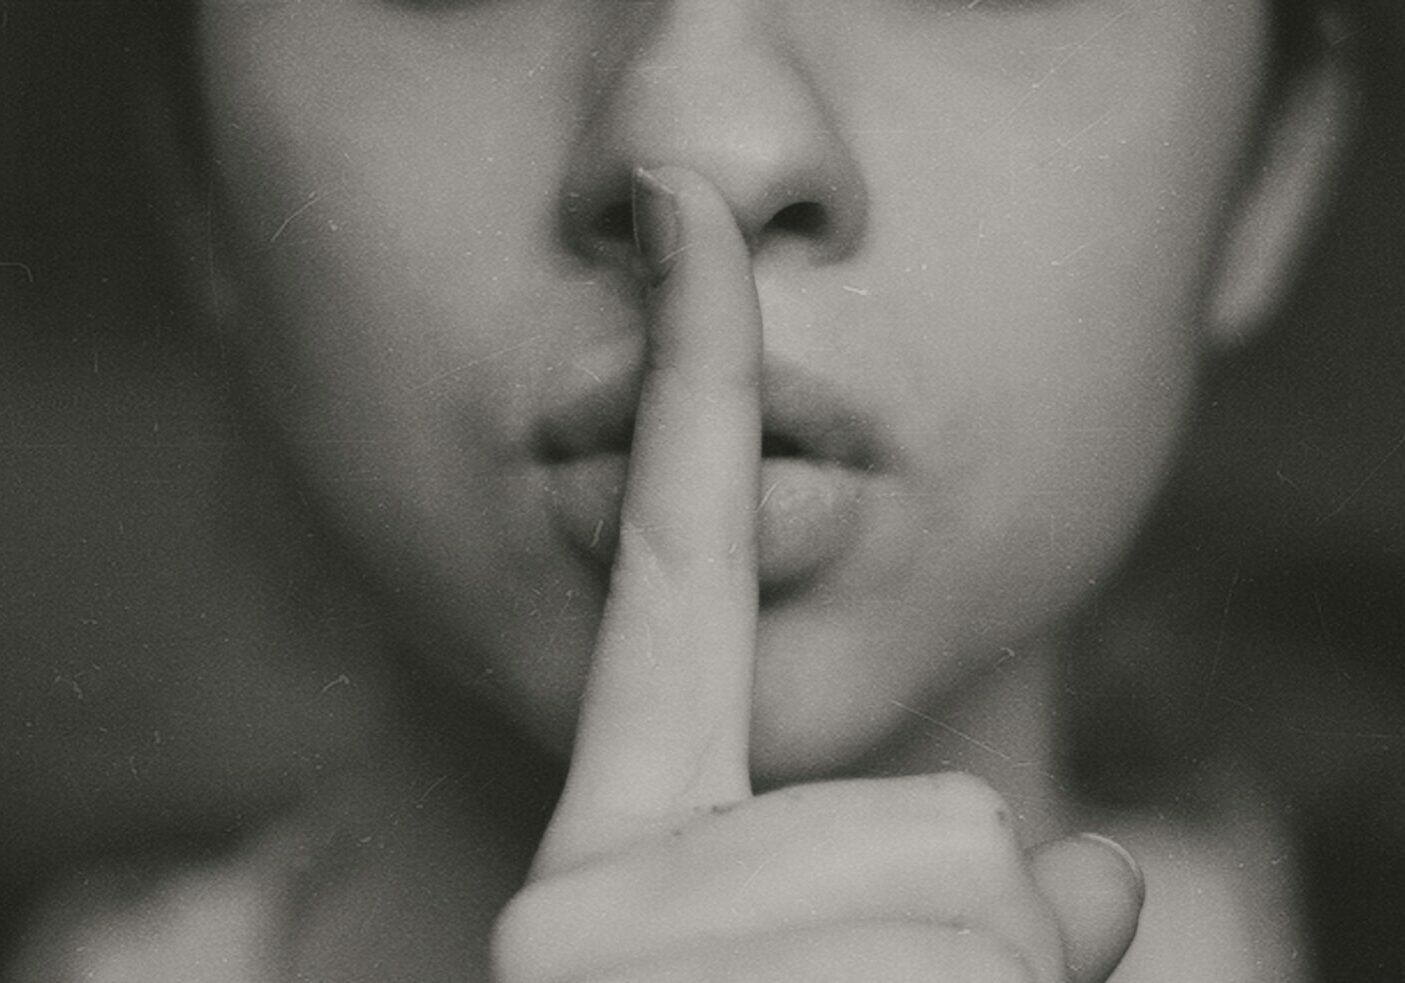 A black and white image of the lover half of a woman's face with her finger against her lips